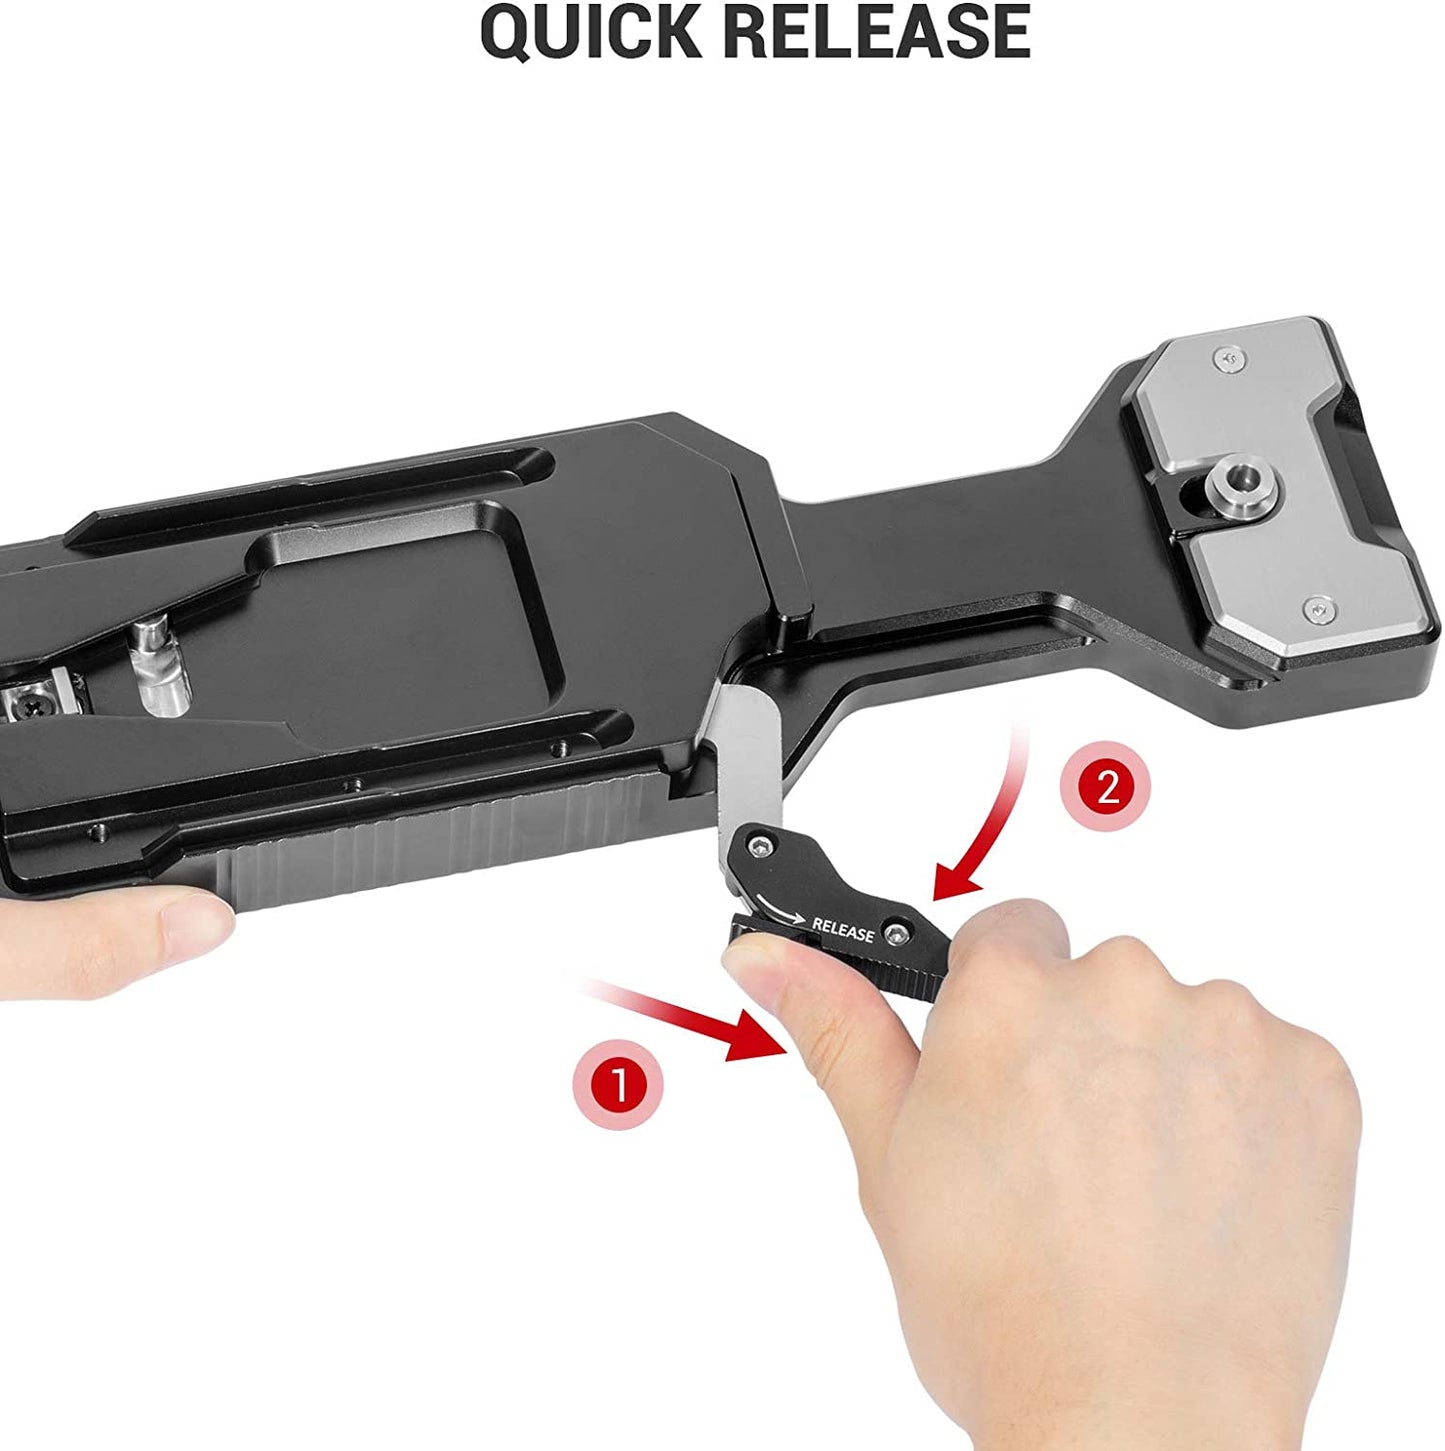 SmallRig VCT-14 Universal Quick Release Tripod Adapter Shoulder Plate with Lever Release,  Multiple 1/4"-20 & 3/8"-16 Threads, and All-metal Construction for Camcorder Support System 2169